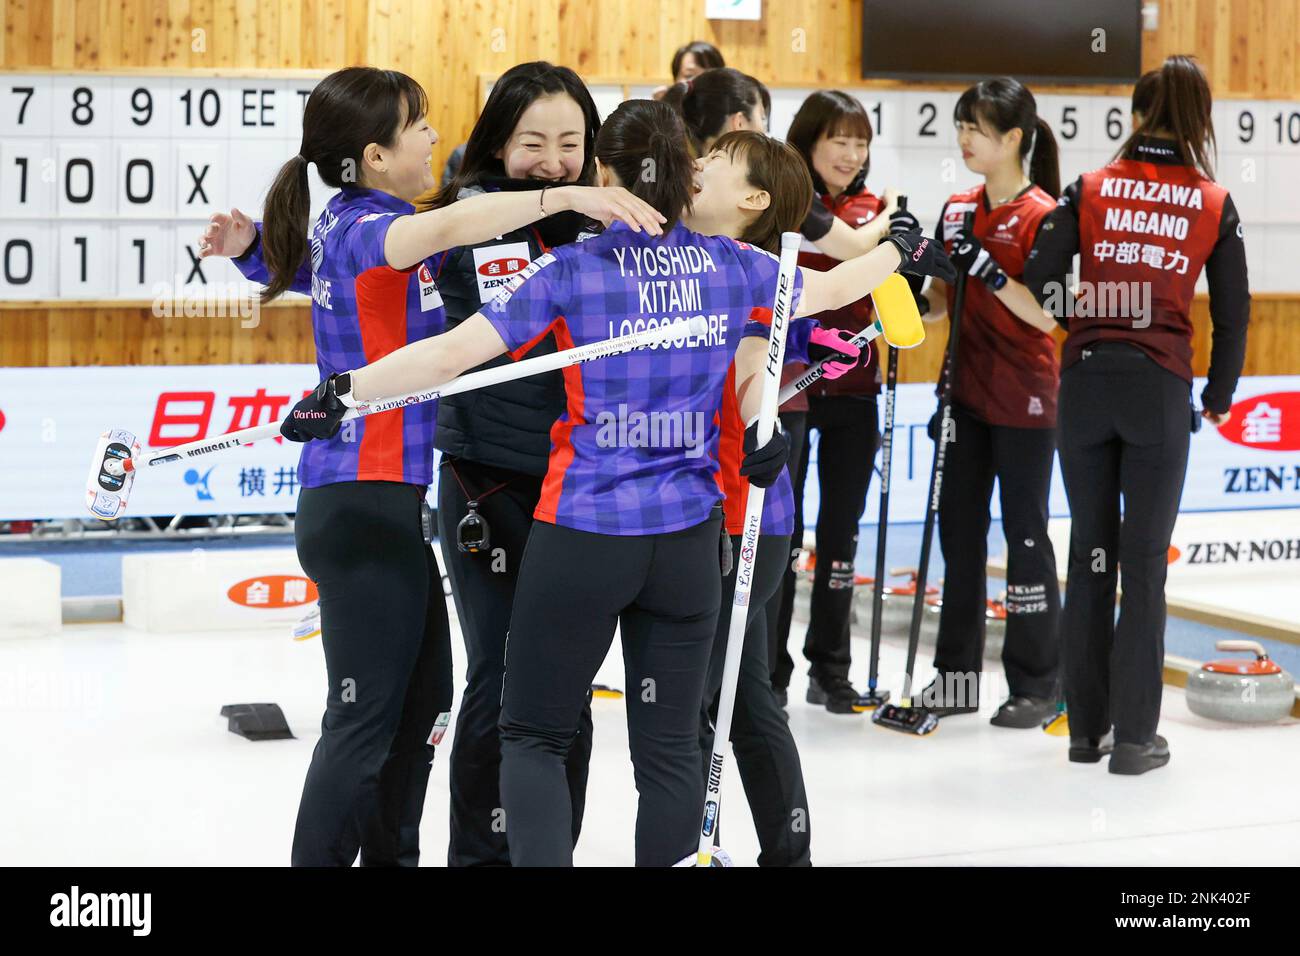 Members of Loco Solare react after winning the Japan National Curling Championships at Advics Tokoro Curling Hall in Kitami, Hokkaido on May 29, 2022